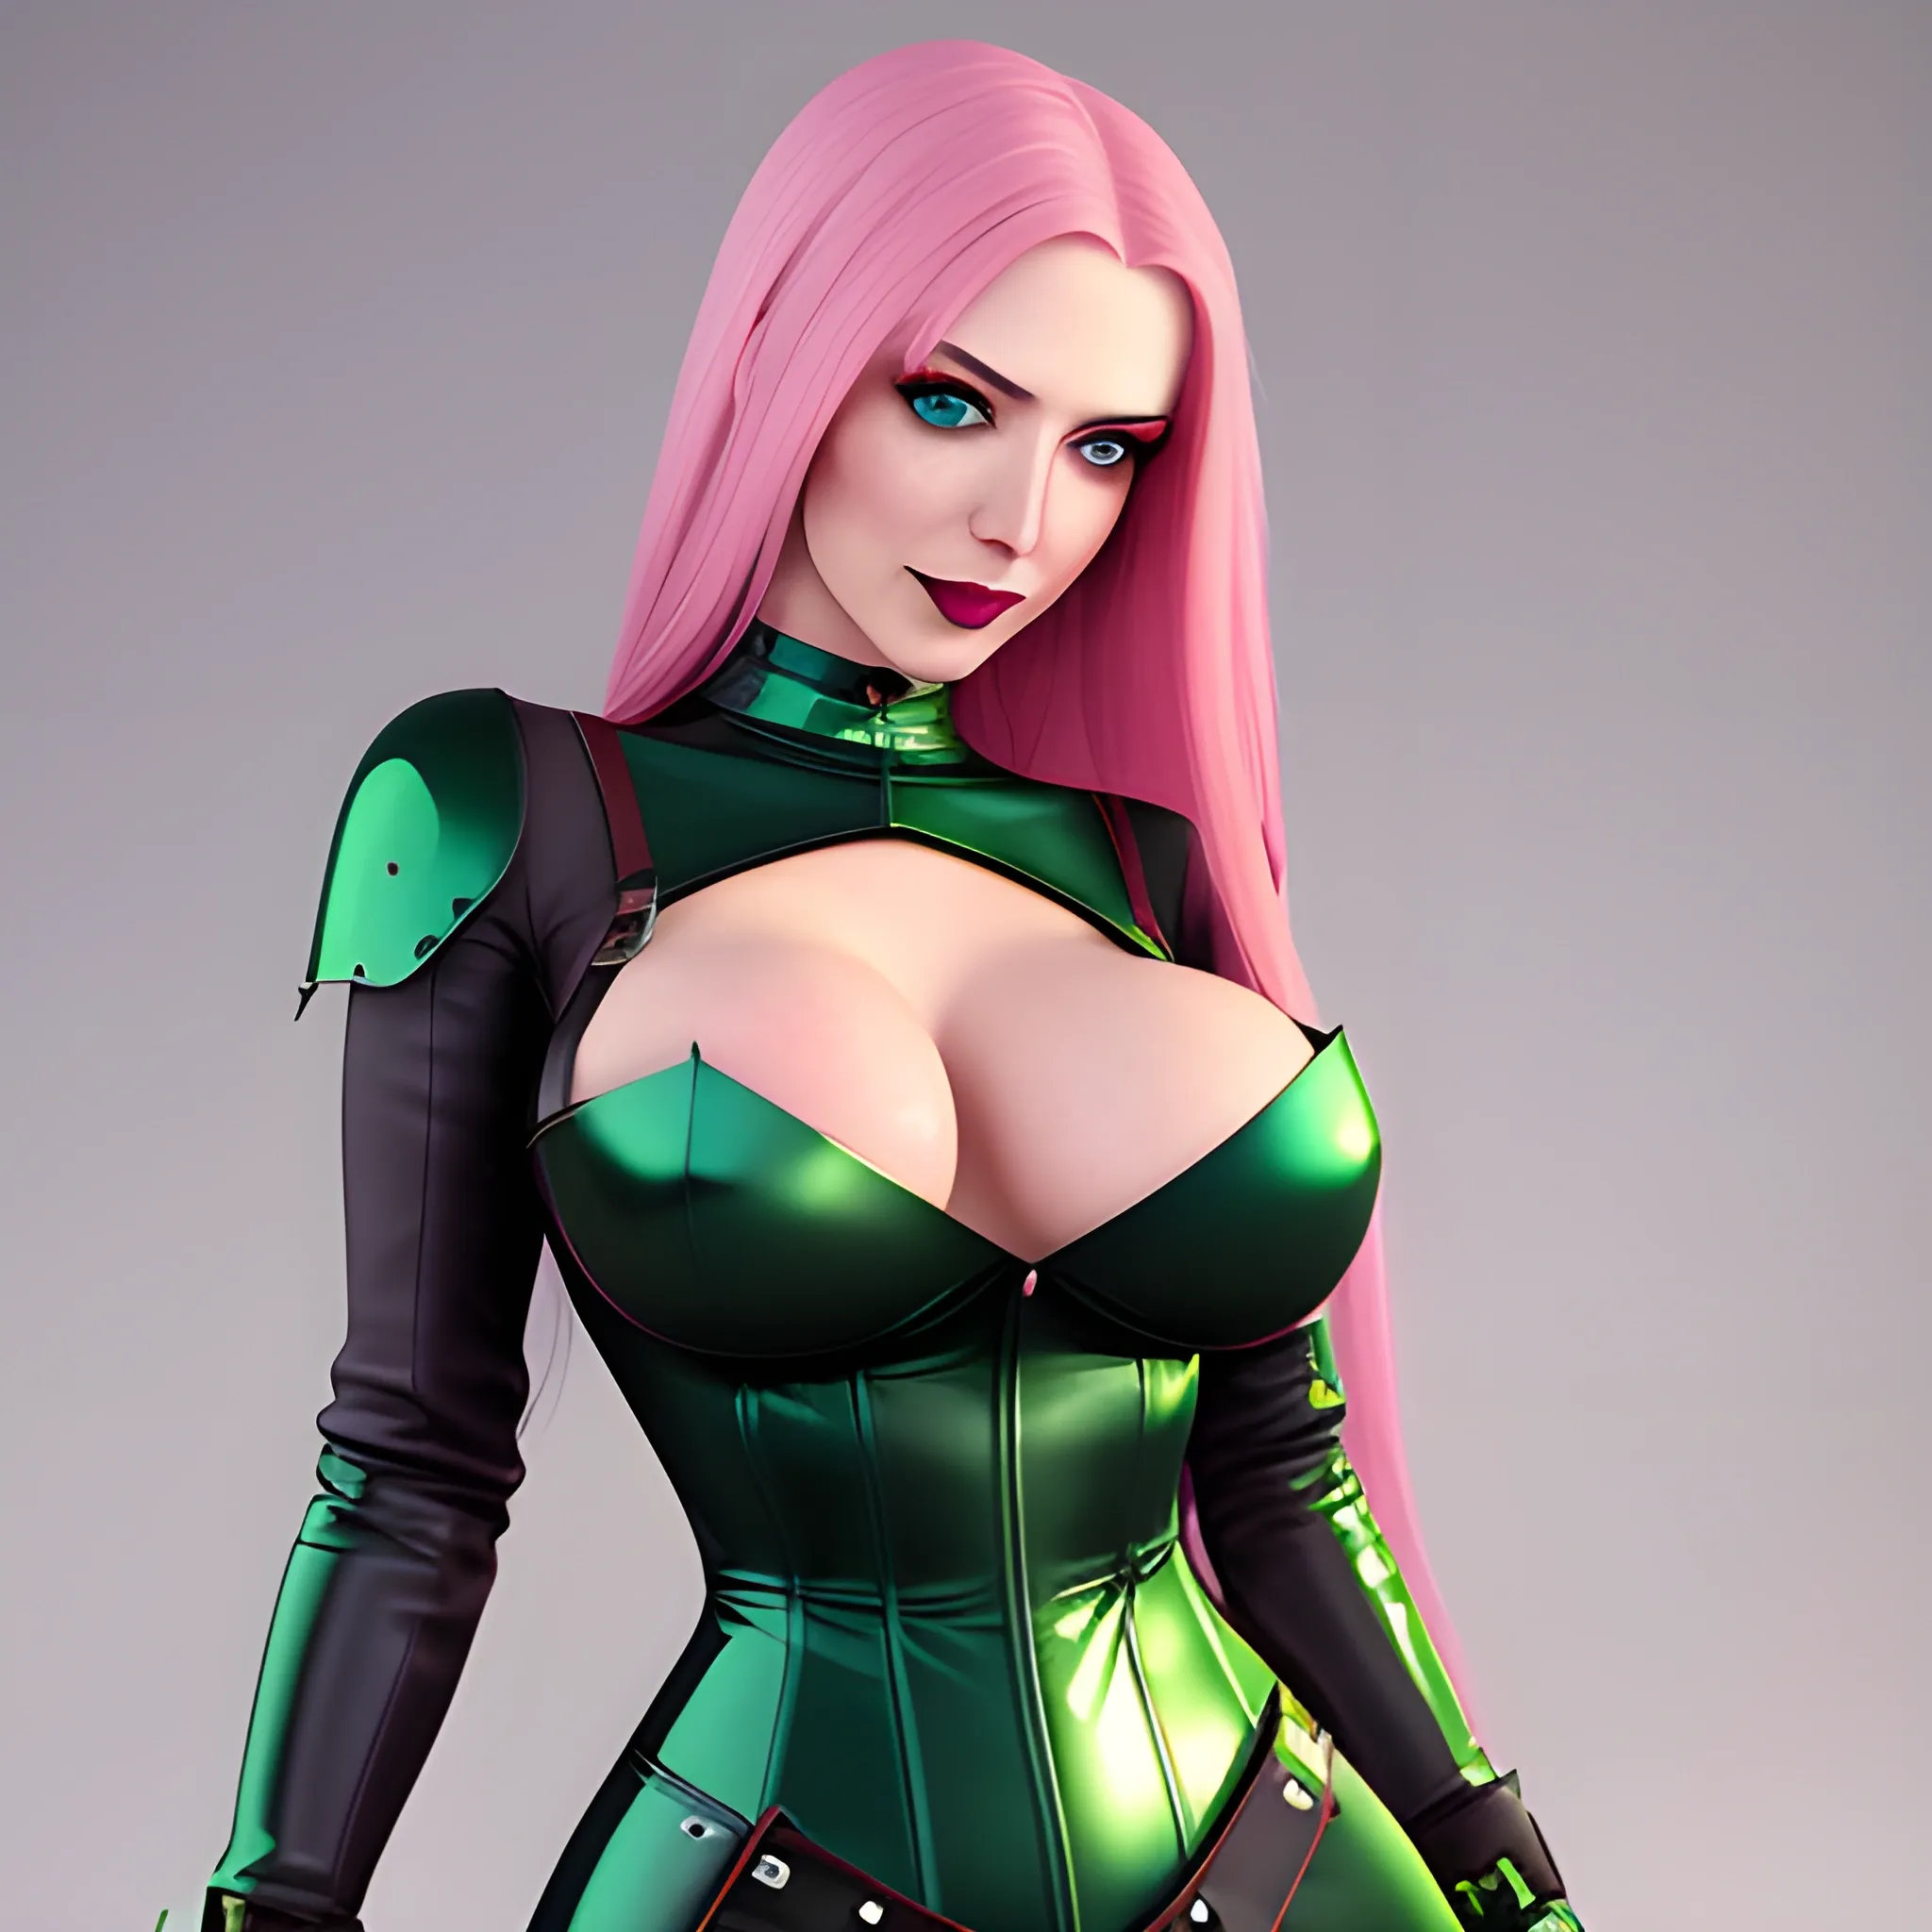 Create a photorealistic image of a cute young woman with long pink hair and light green eyes, she has small breasts, she wears a shiny dark medieval dress in latex and leather, breasts naked, breasts visible, pretty eyes, sweet mouth, whole body visible, highest level of detail